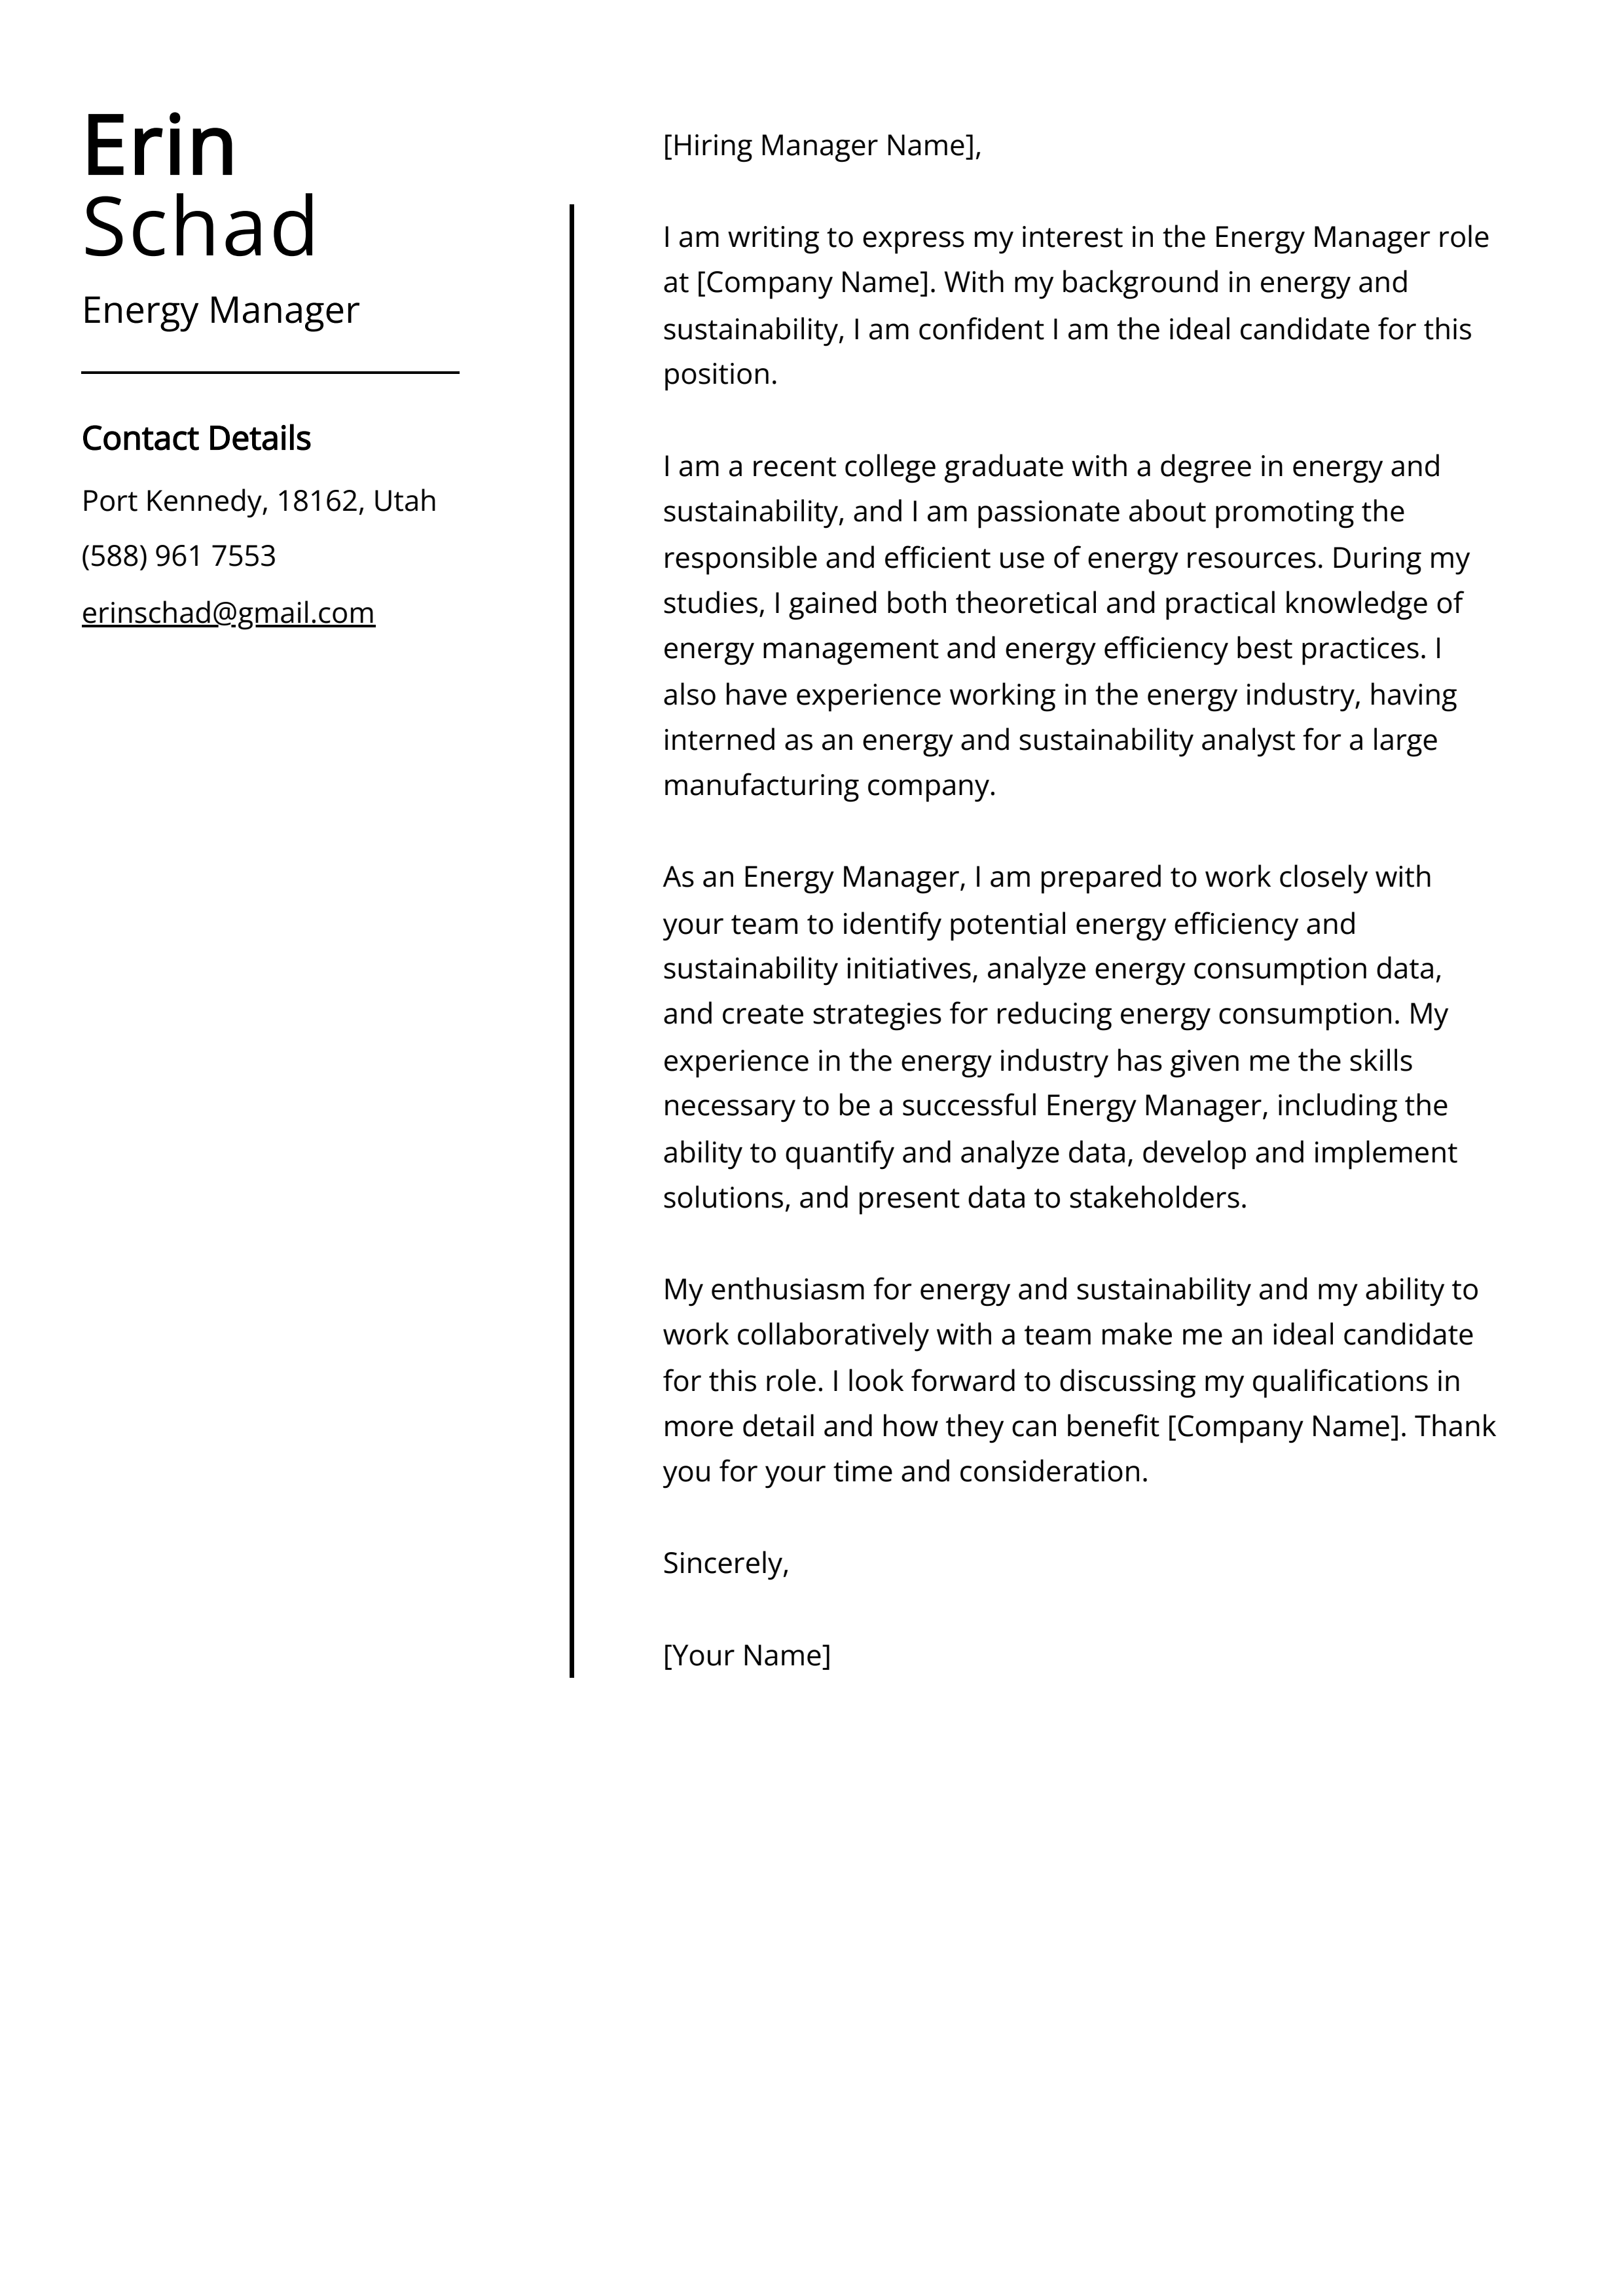 Energy Manager Cover Letter Example